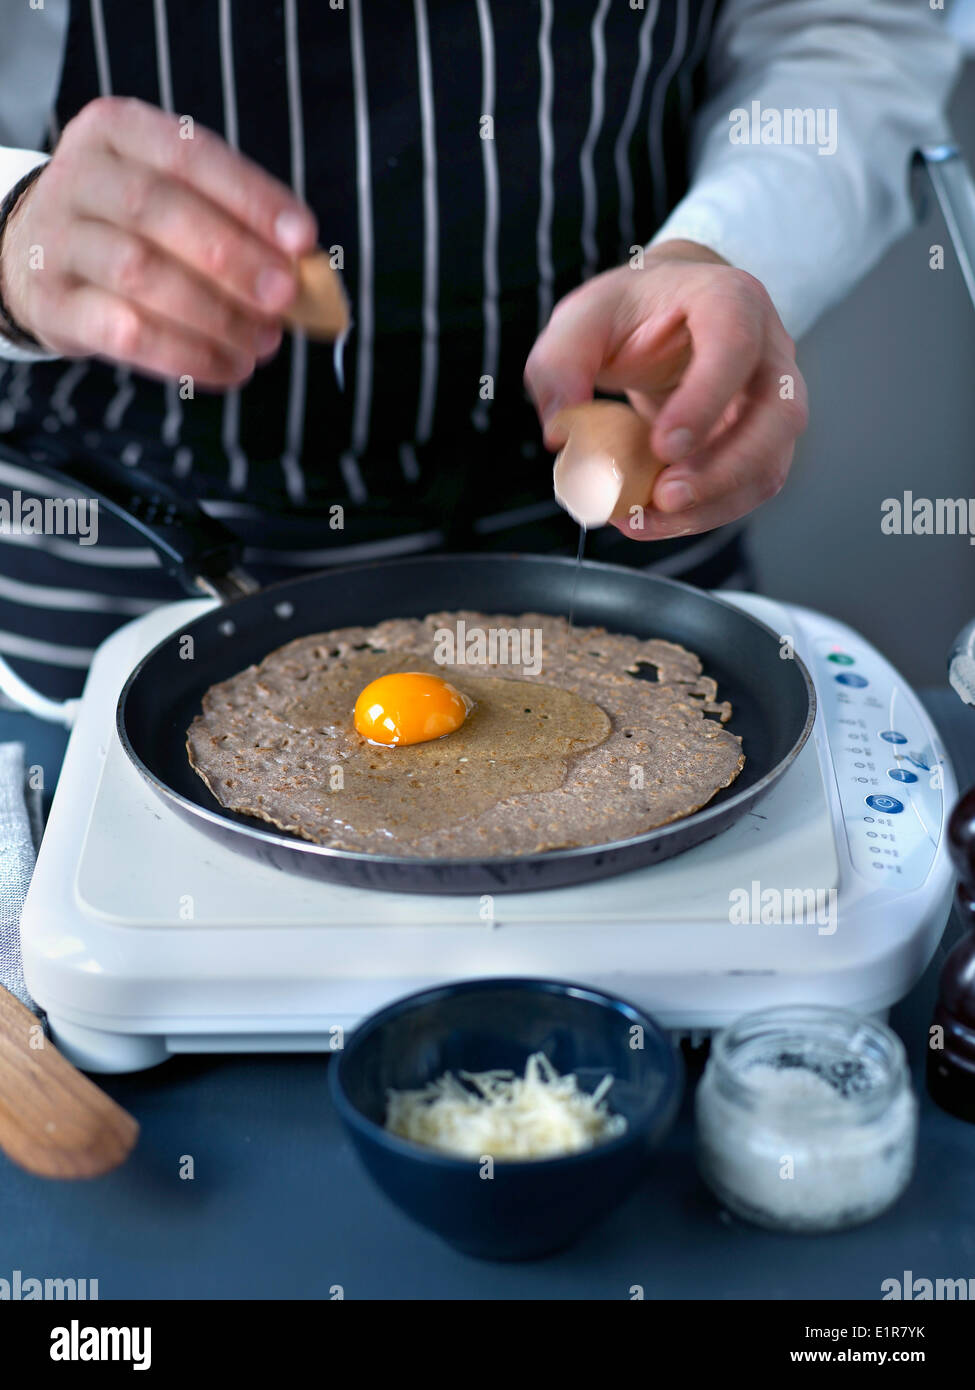 Breaking an egg onto the galette cooking in the frying pan Stock Photo